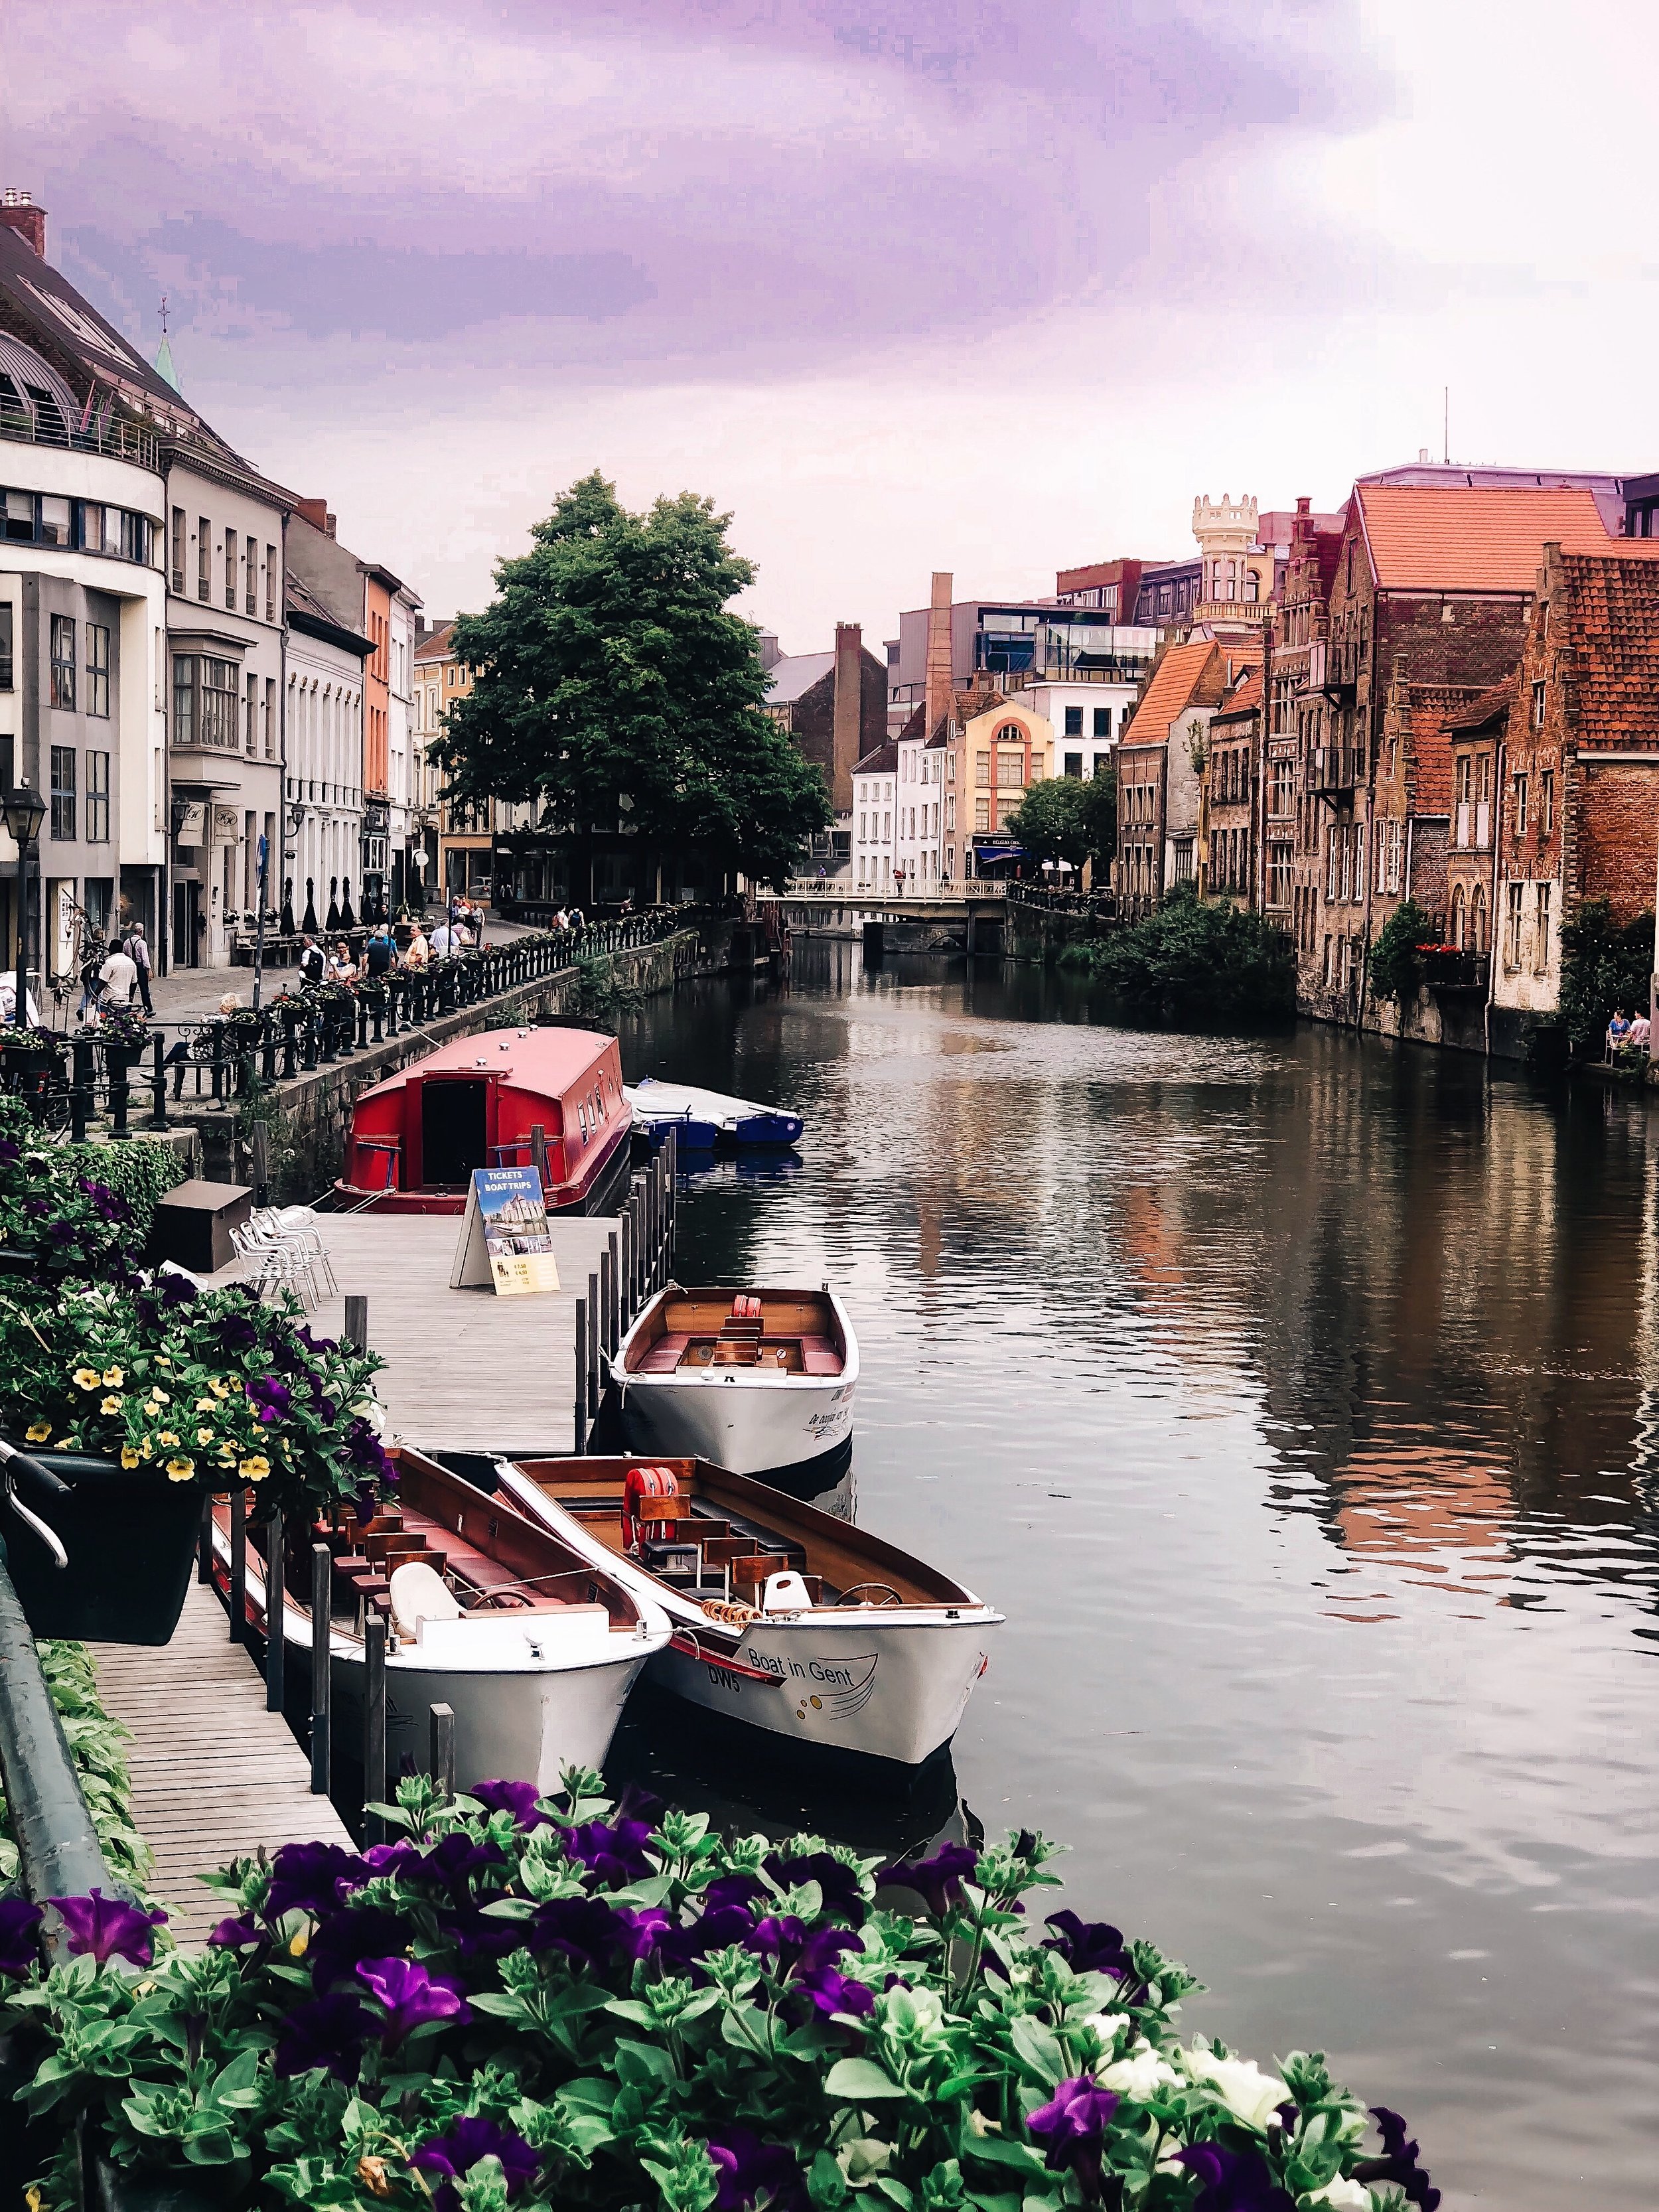 Belgium Travel Guide Bruges Ghent In 4 Days Esther Santer Fashion Blog NYC Street Style Blogger Outfit Sight Seeing Tourist Shop What How To Wear Expore What To Do Vacatiom Itinerary Short Stopover EuroTrip Europe Summer Layover Activities Suggestions.jpg